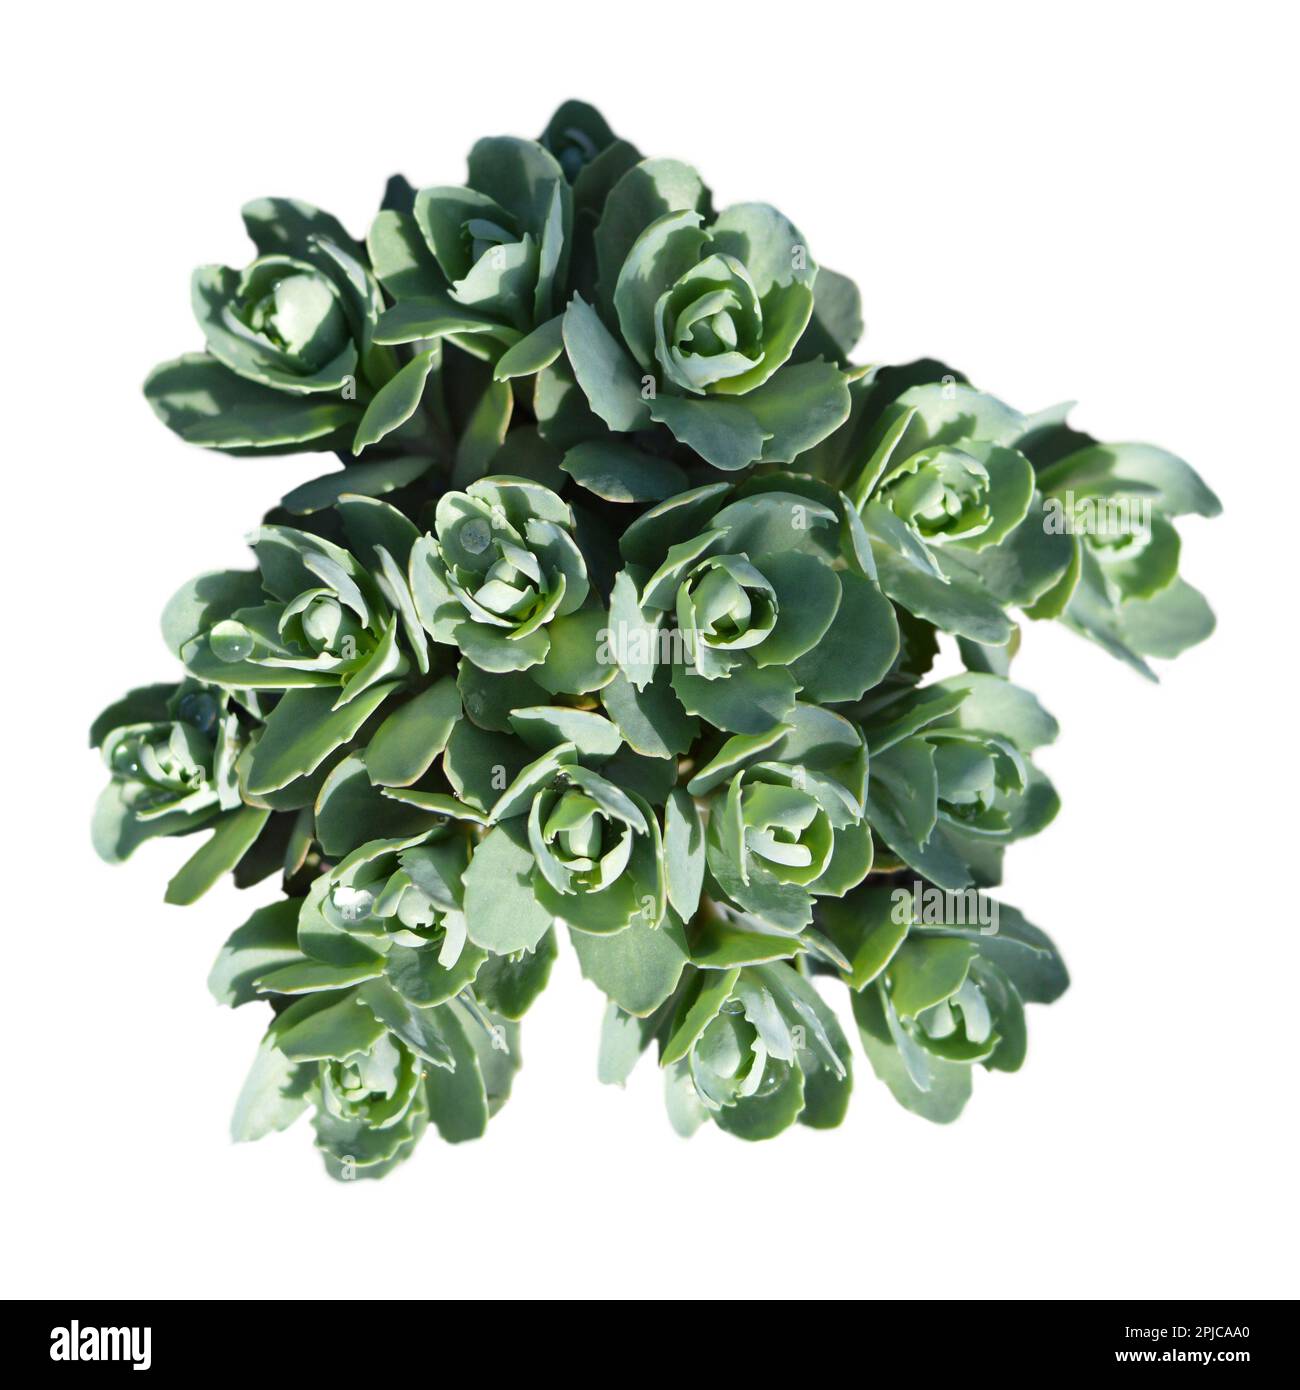 Young Sedum (Stonecrop) plant isolated on white background. Top view of Sedum spectabile plant. Stock Photo